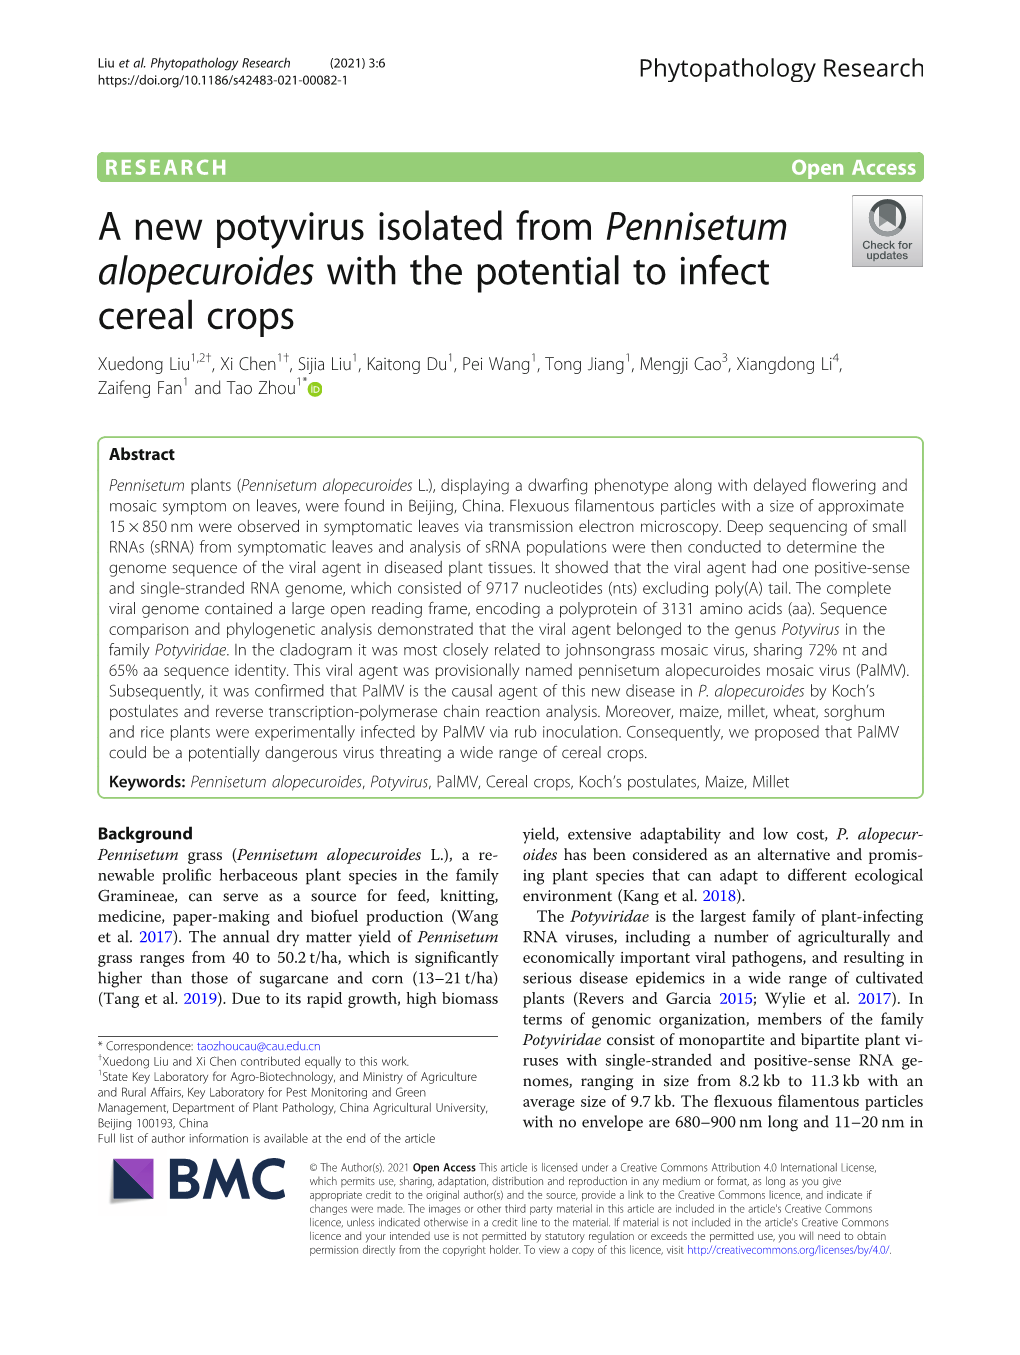 A New Potyvirus Isolated from Pennisetum Alopecuroides with The